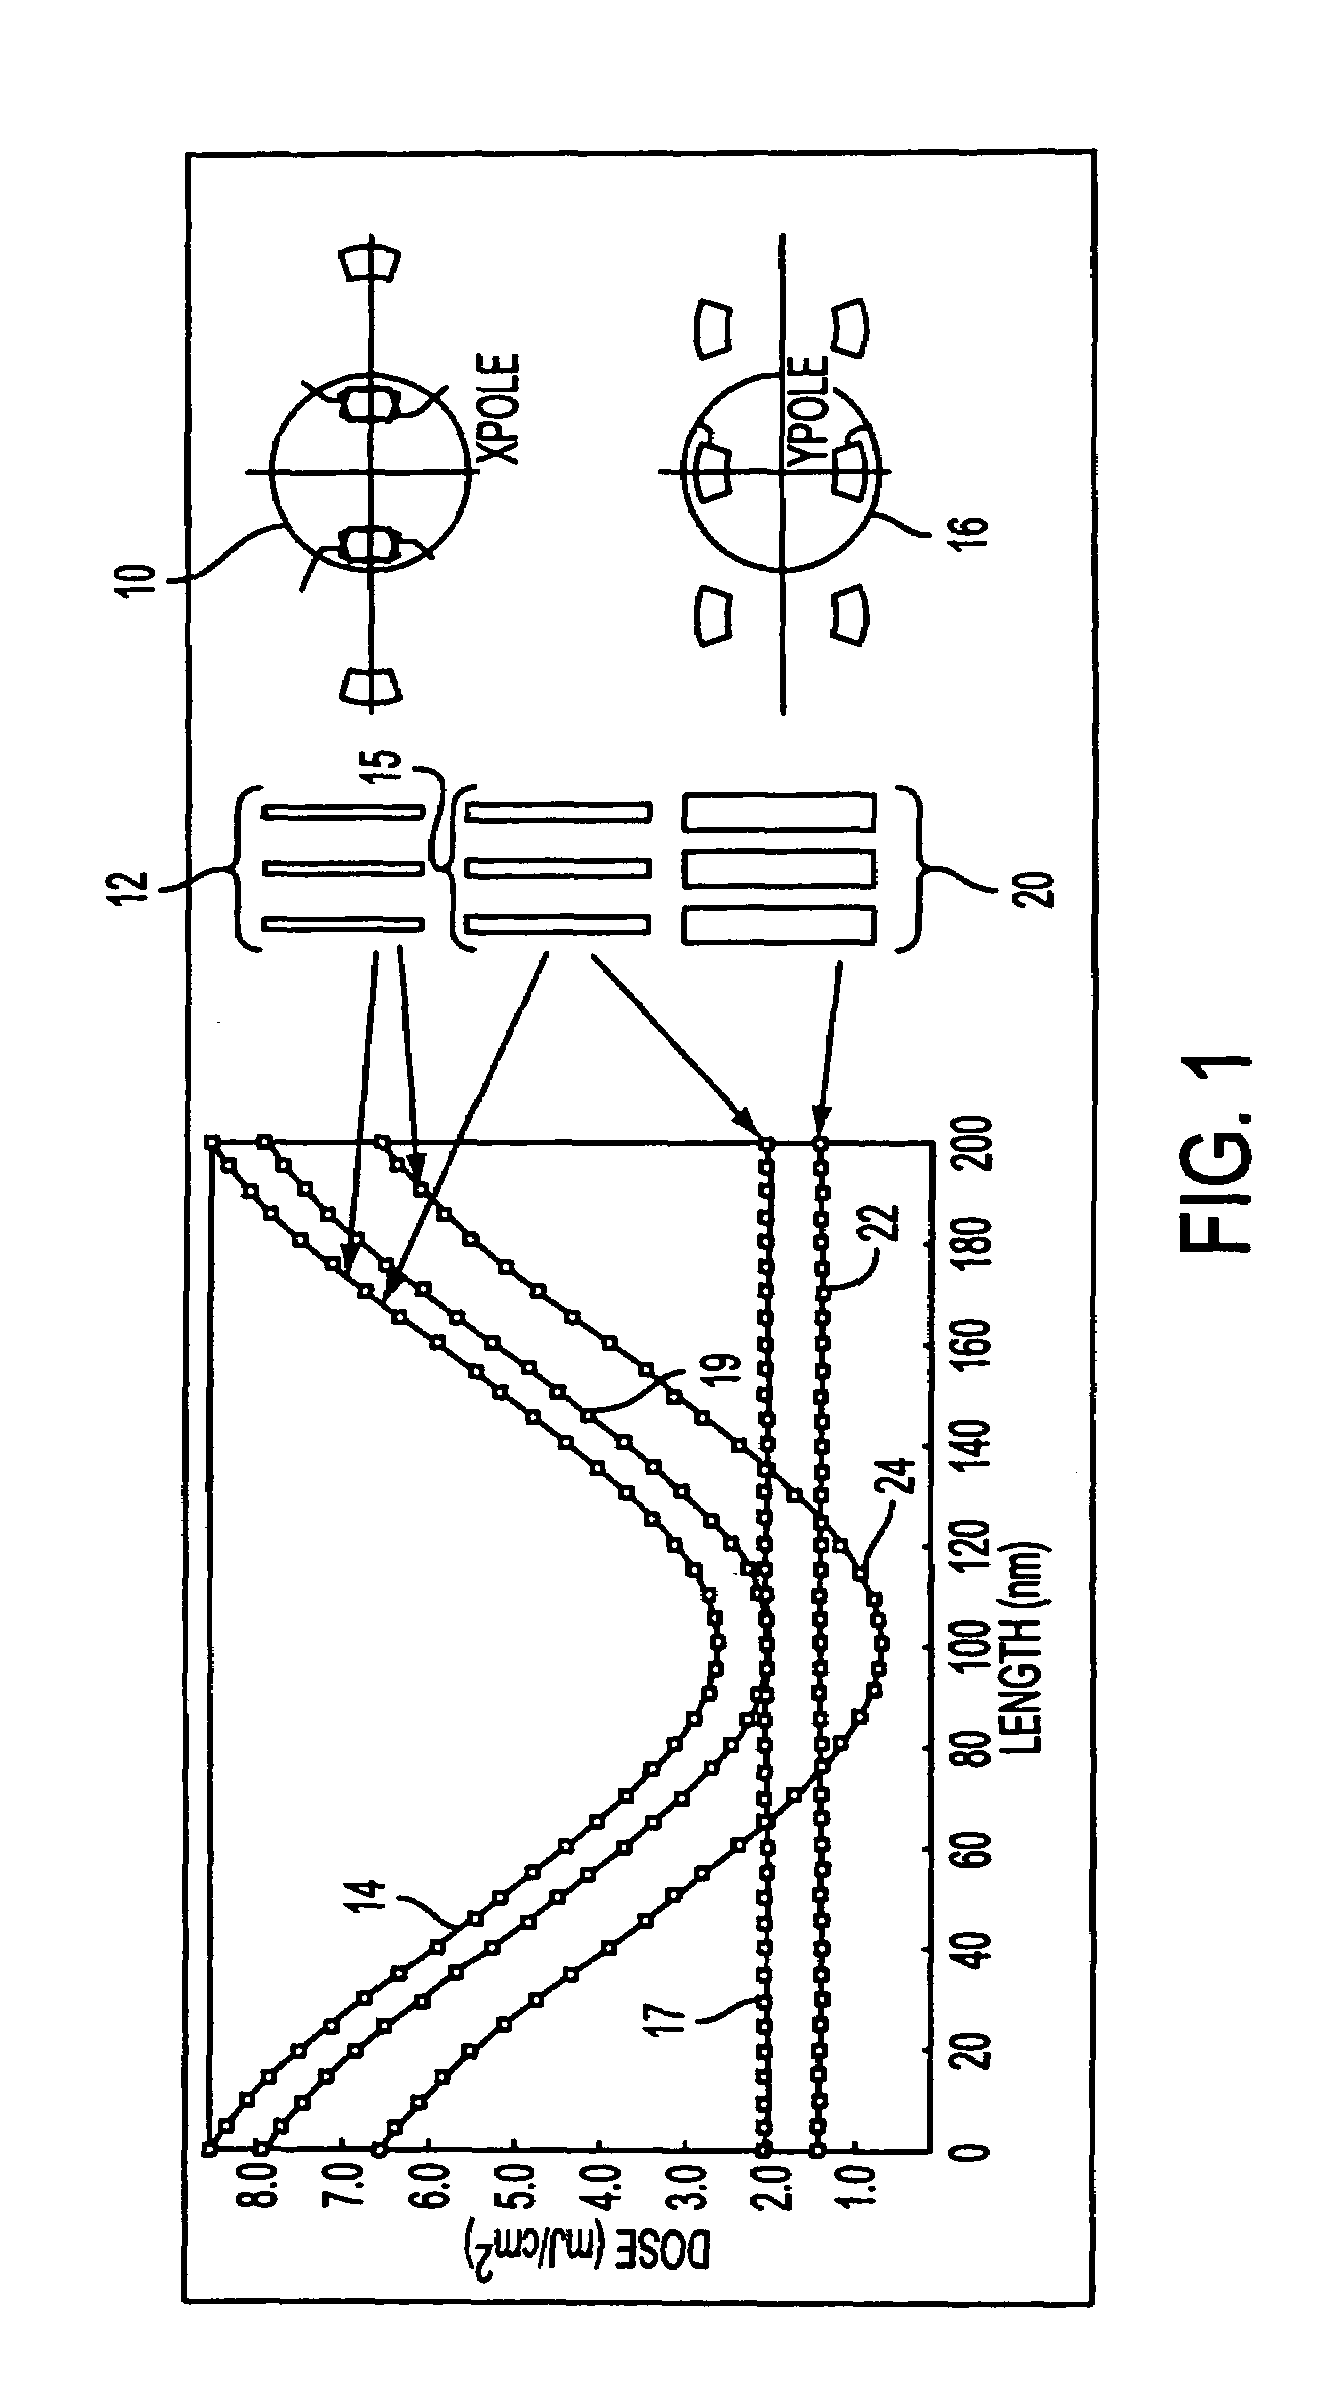 Method and apparatus for performing model-based layout conversion for use with dipole illumination